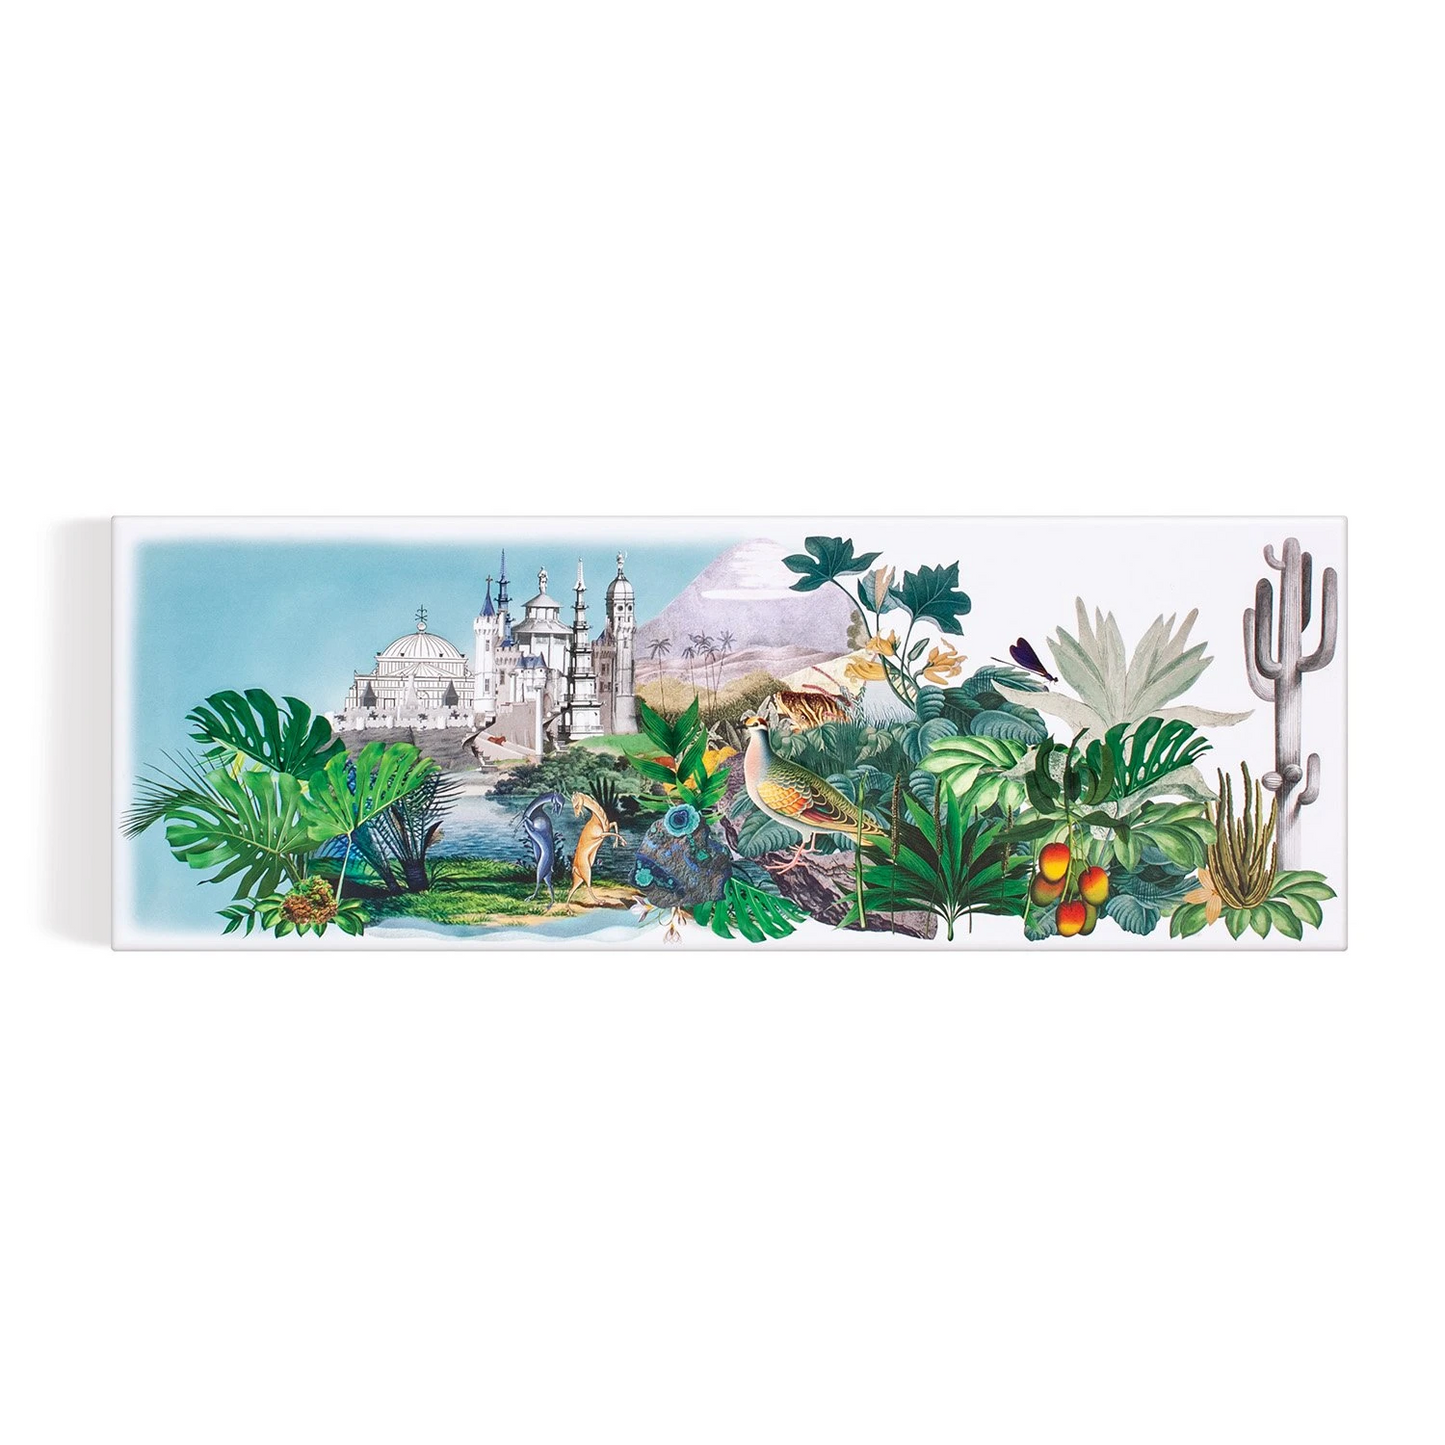 Christian Lacroix Heritage Collection - "Rêveries" A 1000 Piece Double Sided Panoramic Puzzle